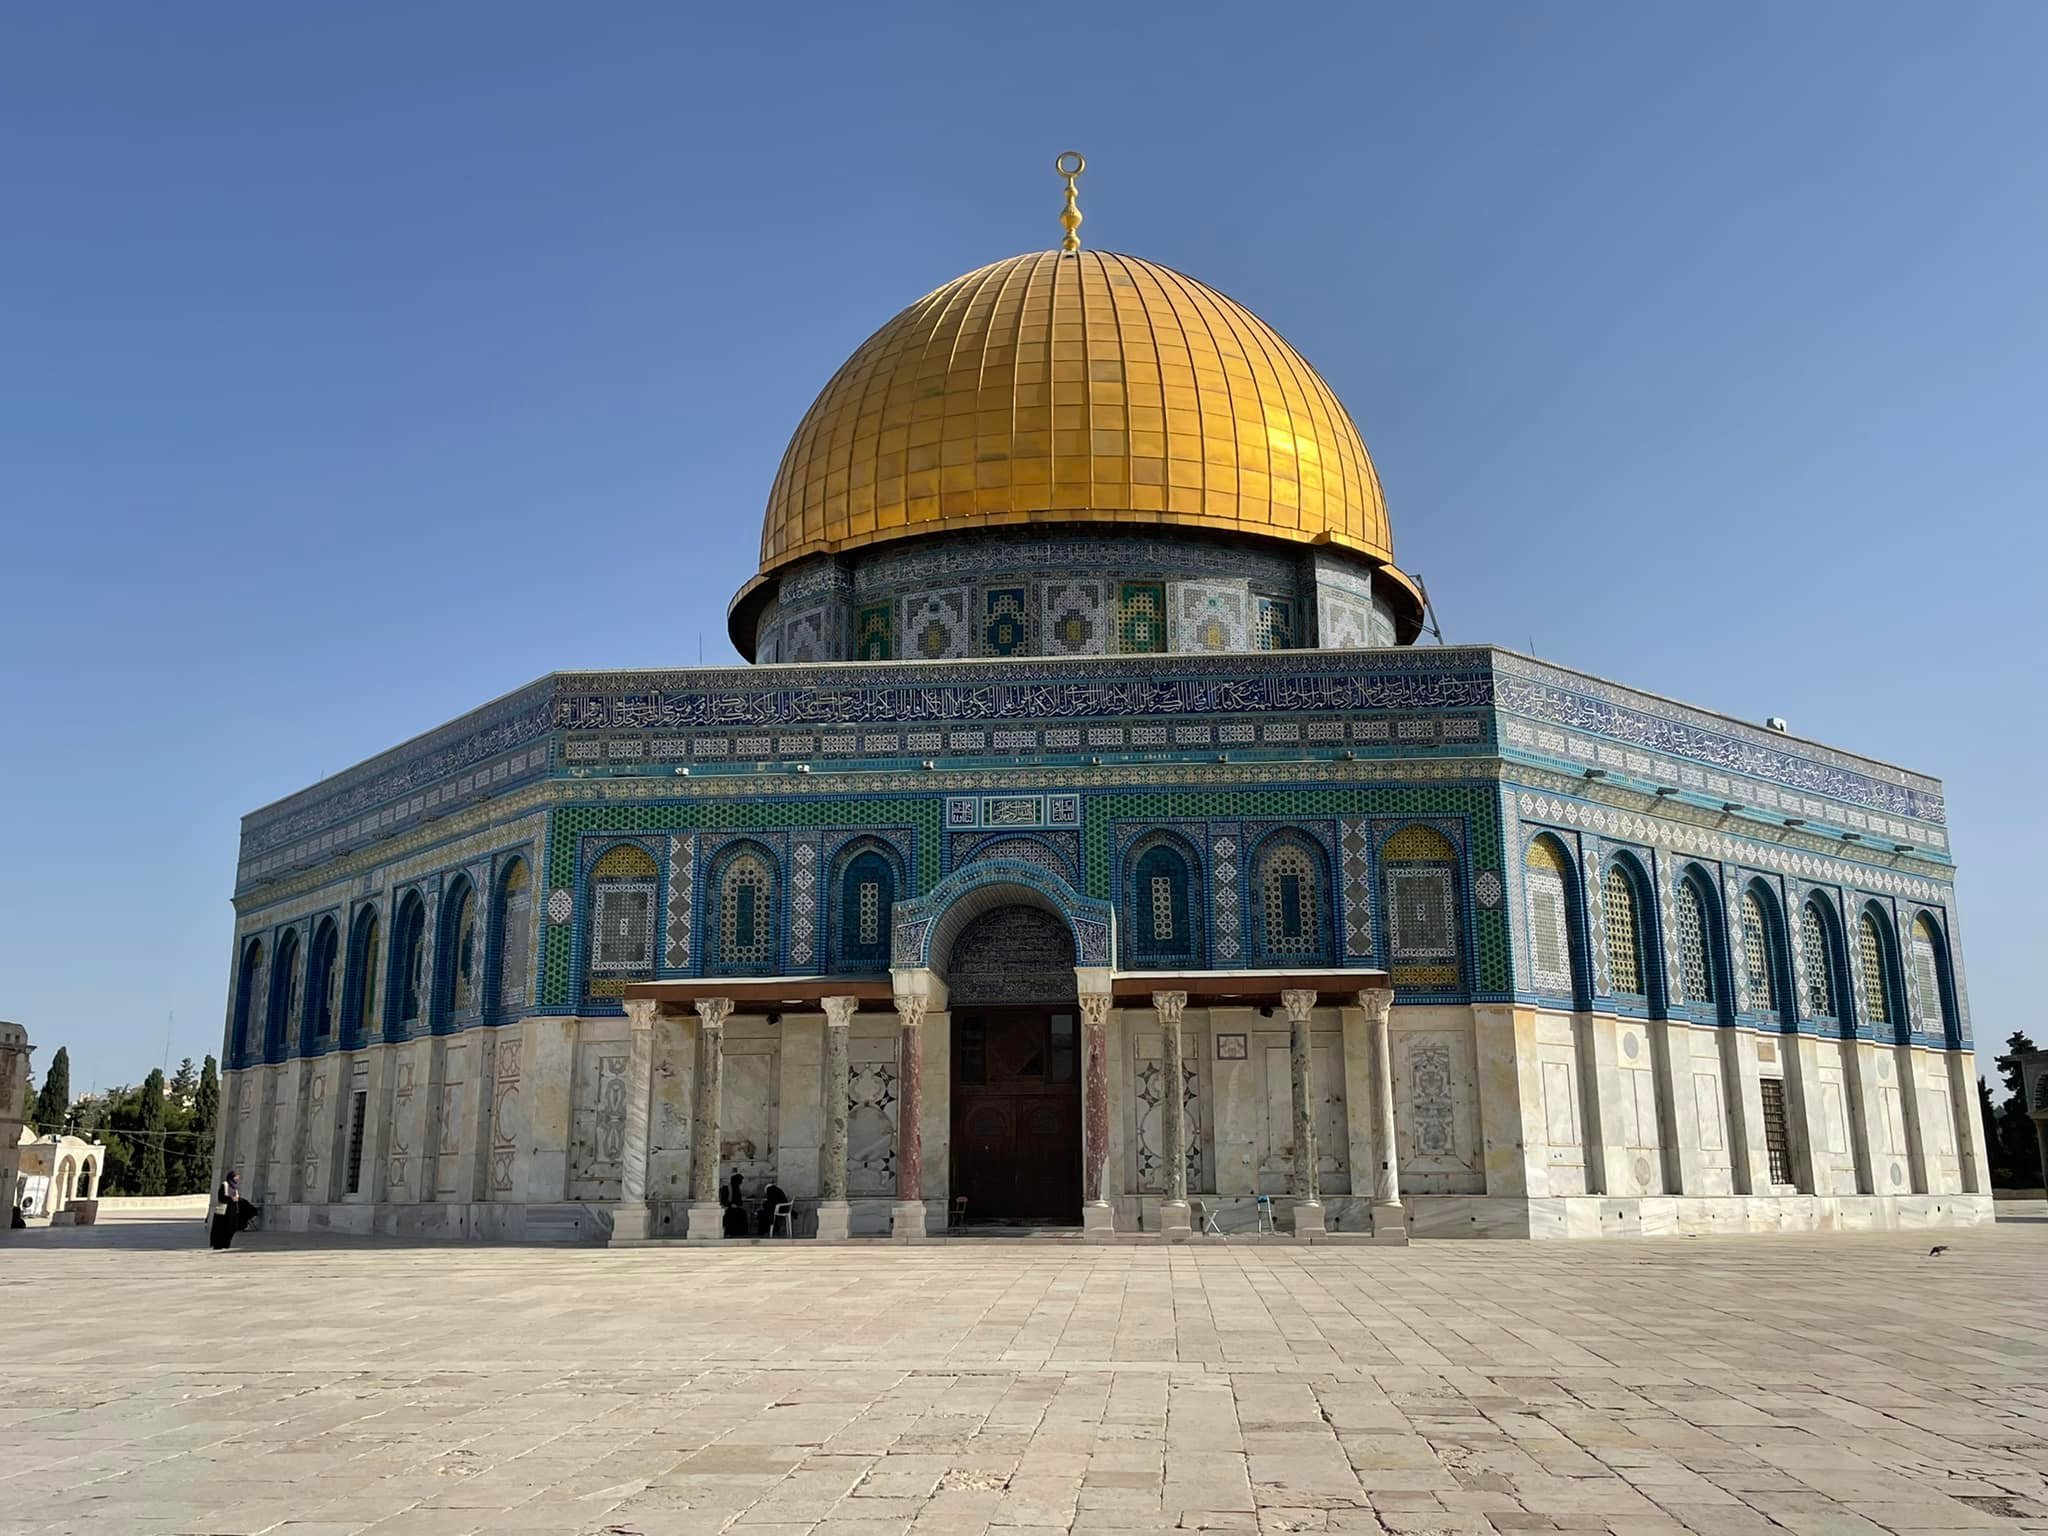  The stone was originally built with actual gold. The gold was harvested during some lean times. It is not a mosque. It is a memorial to the spot where Abraham almost sacrificed Isaac, and where the altar over the holy of holies stood in Solomons Tem